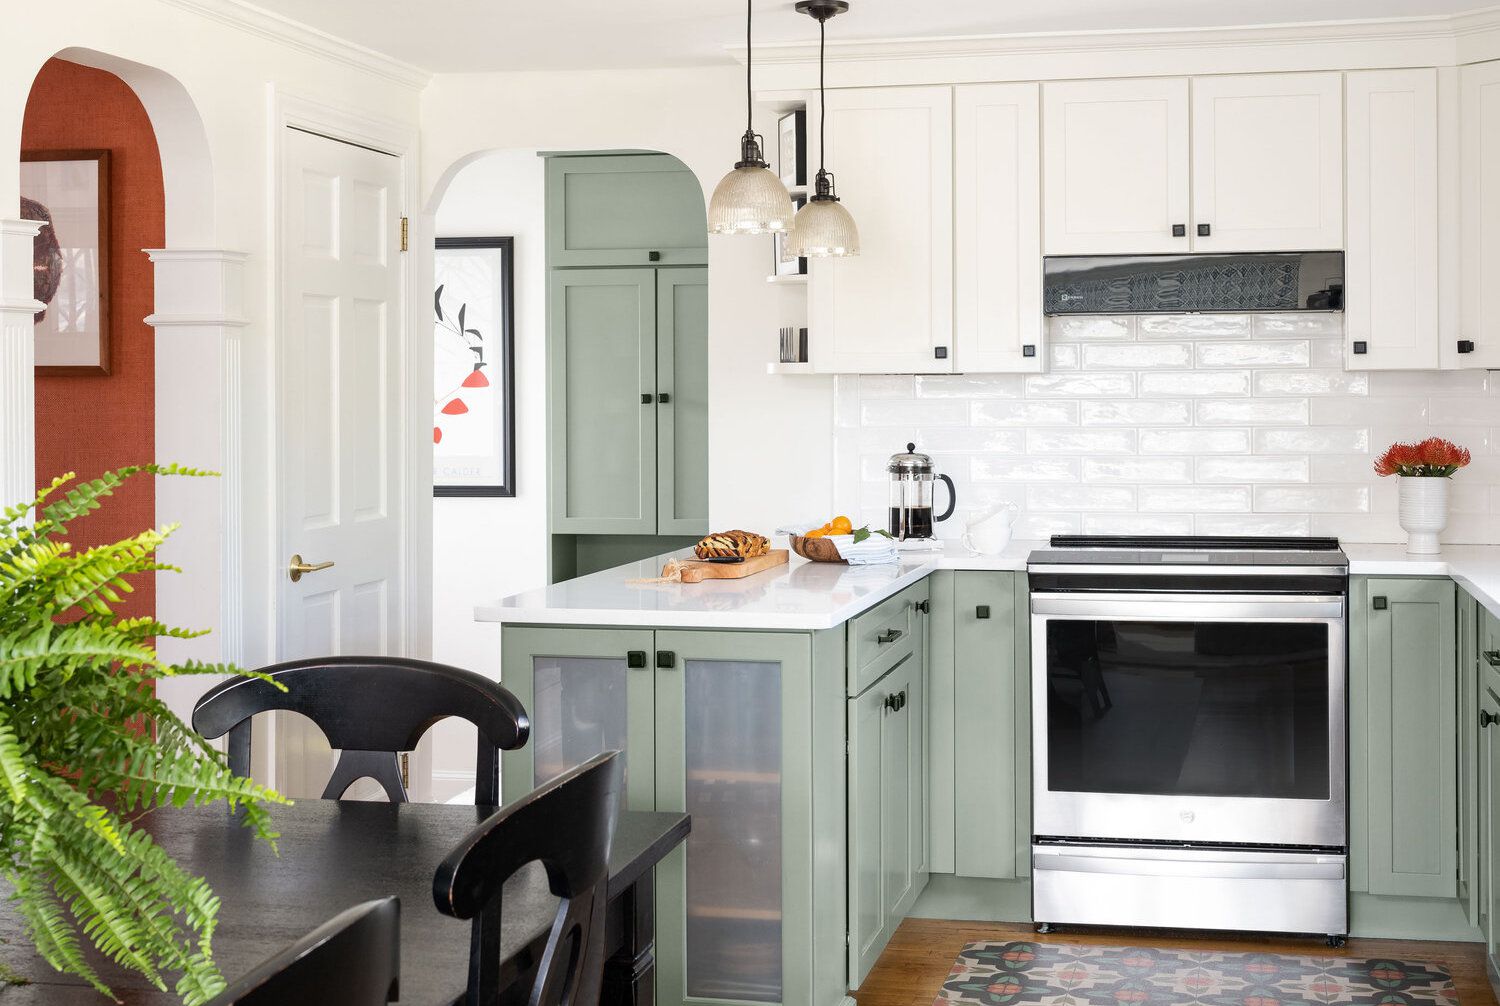 18 Kitchens With Sage Green Cabinets We're Loving